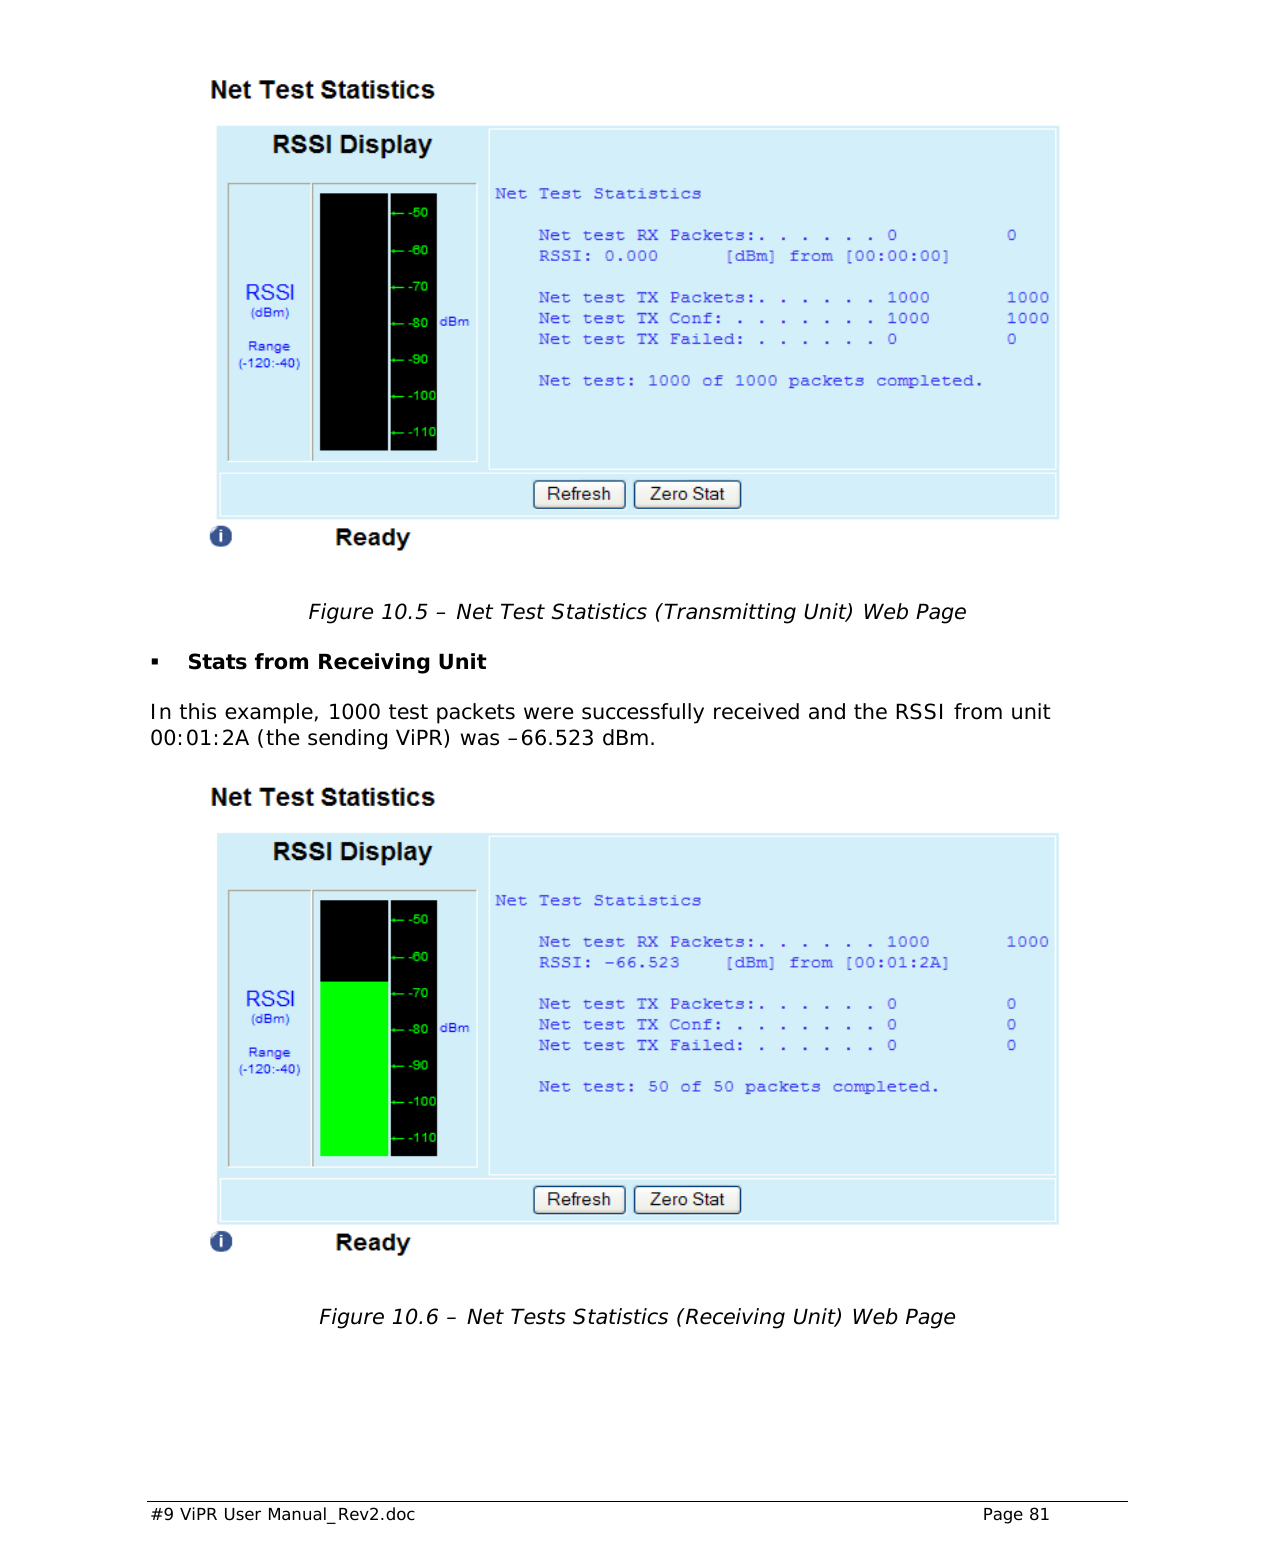  #9 ViPR User Manual_Rev2.doc    Page 81   Figure 10.5 – Net Test Statistics (Transmitting Unit) Web Page  Stats from Receiving Unit In this example, 1000 test packets were successfully received and the RSSI from unit 00:01:2A (the sending ViPR) was –66.523 dBm.   Figure 10.6 – Net Tests Statistics (Receiving Unit) Web Page 